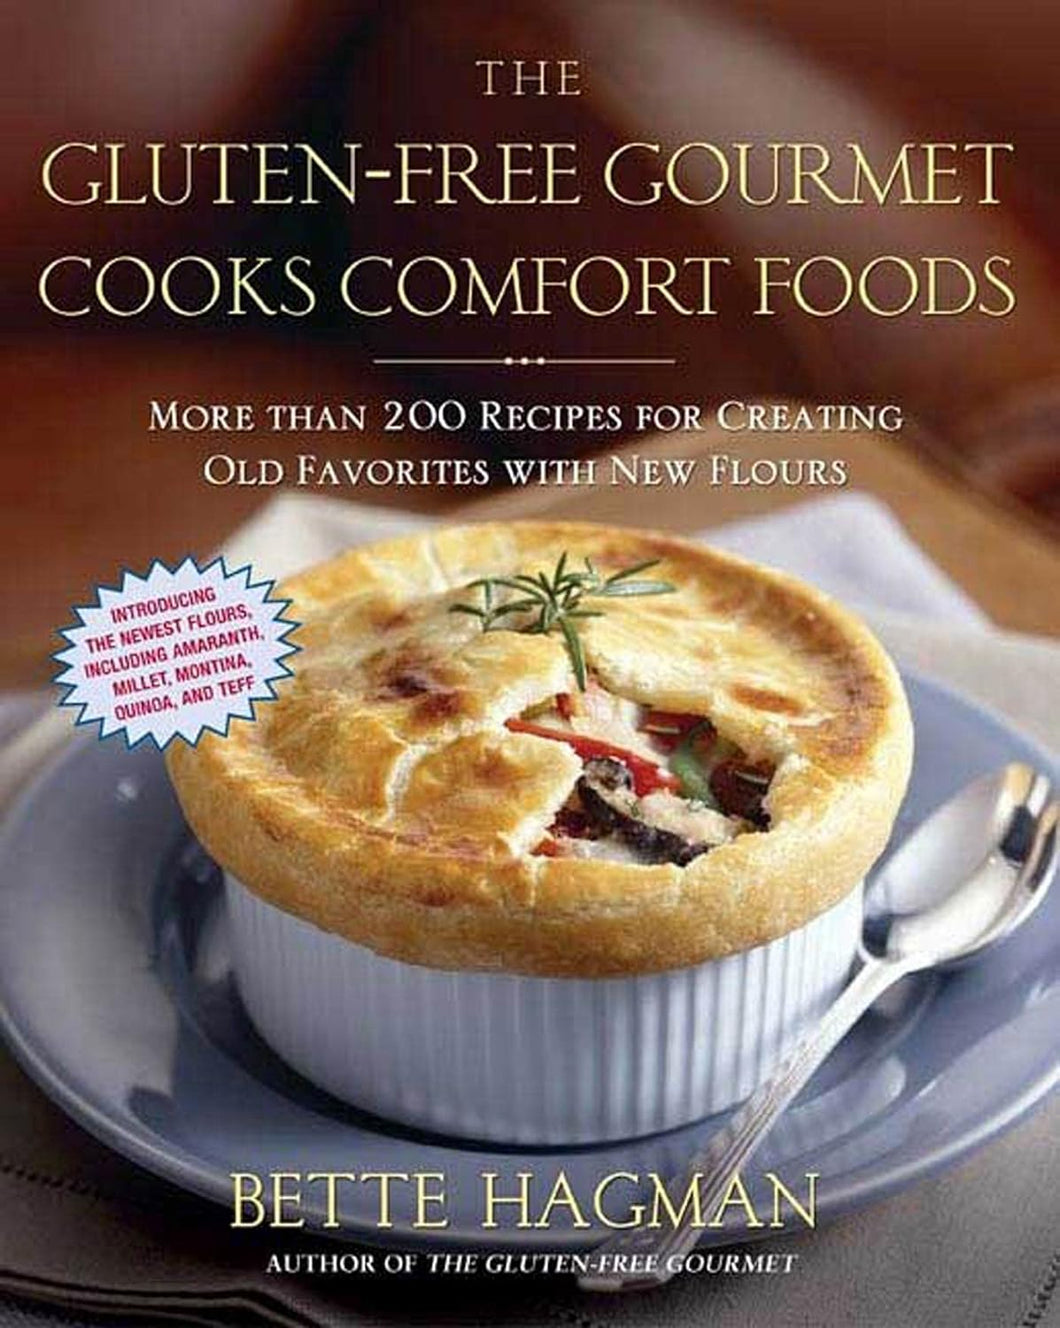 The Gluten-Free Gourmet Cooks Comfort Foods: Creating Old Favorites with the New Flours by Bette Hagman